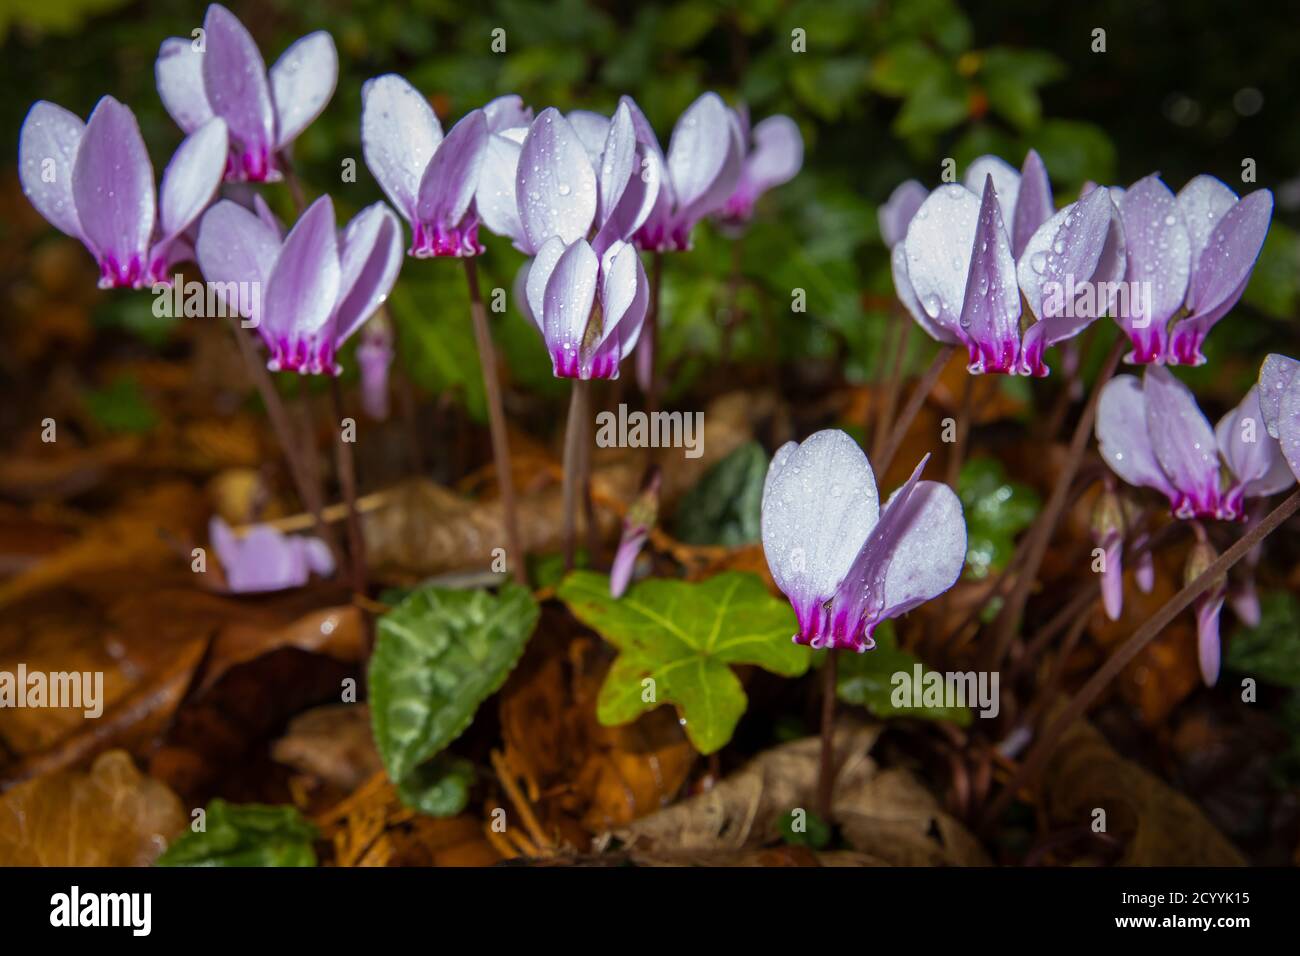 A cluster of delicate pink to purple hardy perennial autumn flowering ivy-leaved cyclamen hererifolium, in flower amongst ivy and fallen leaves Stock Photo